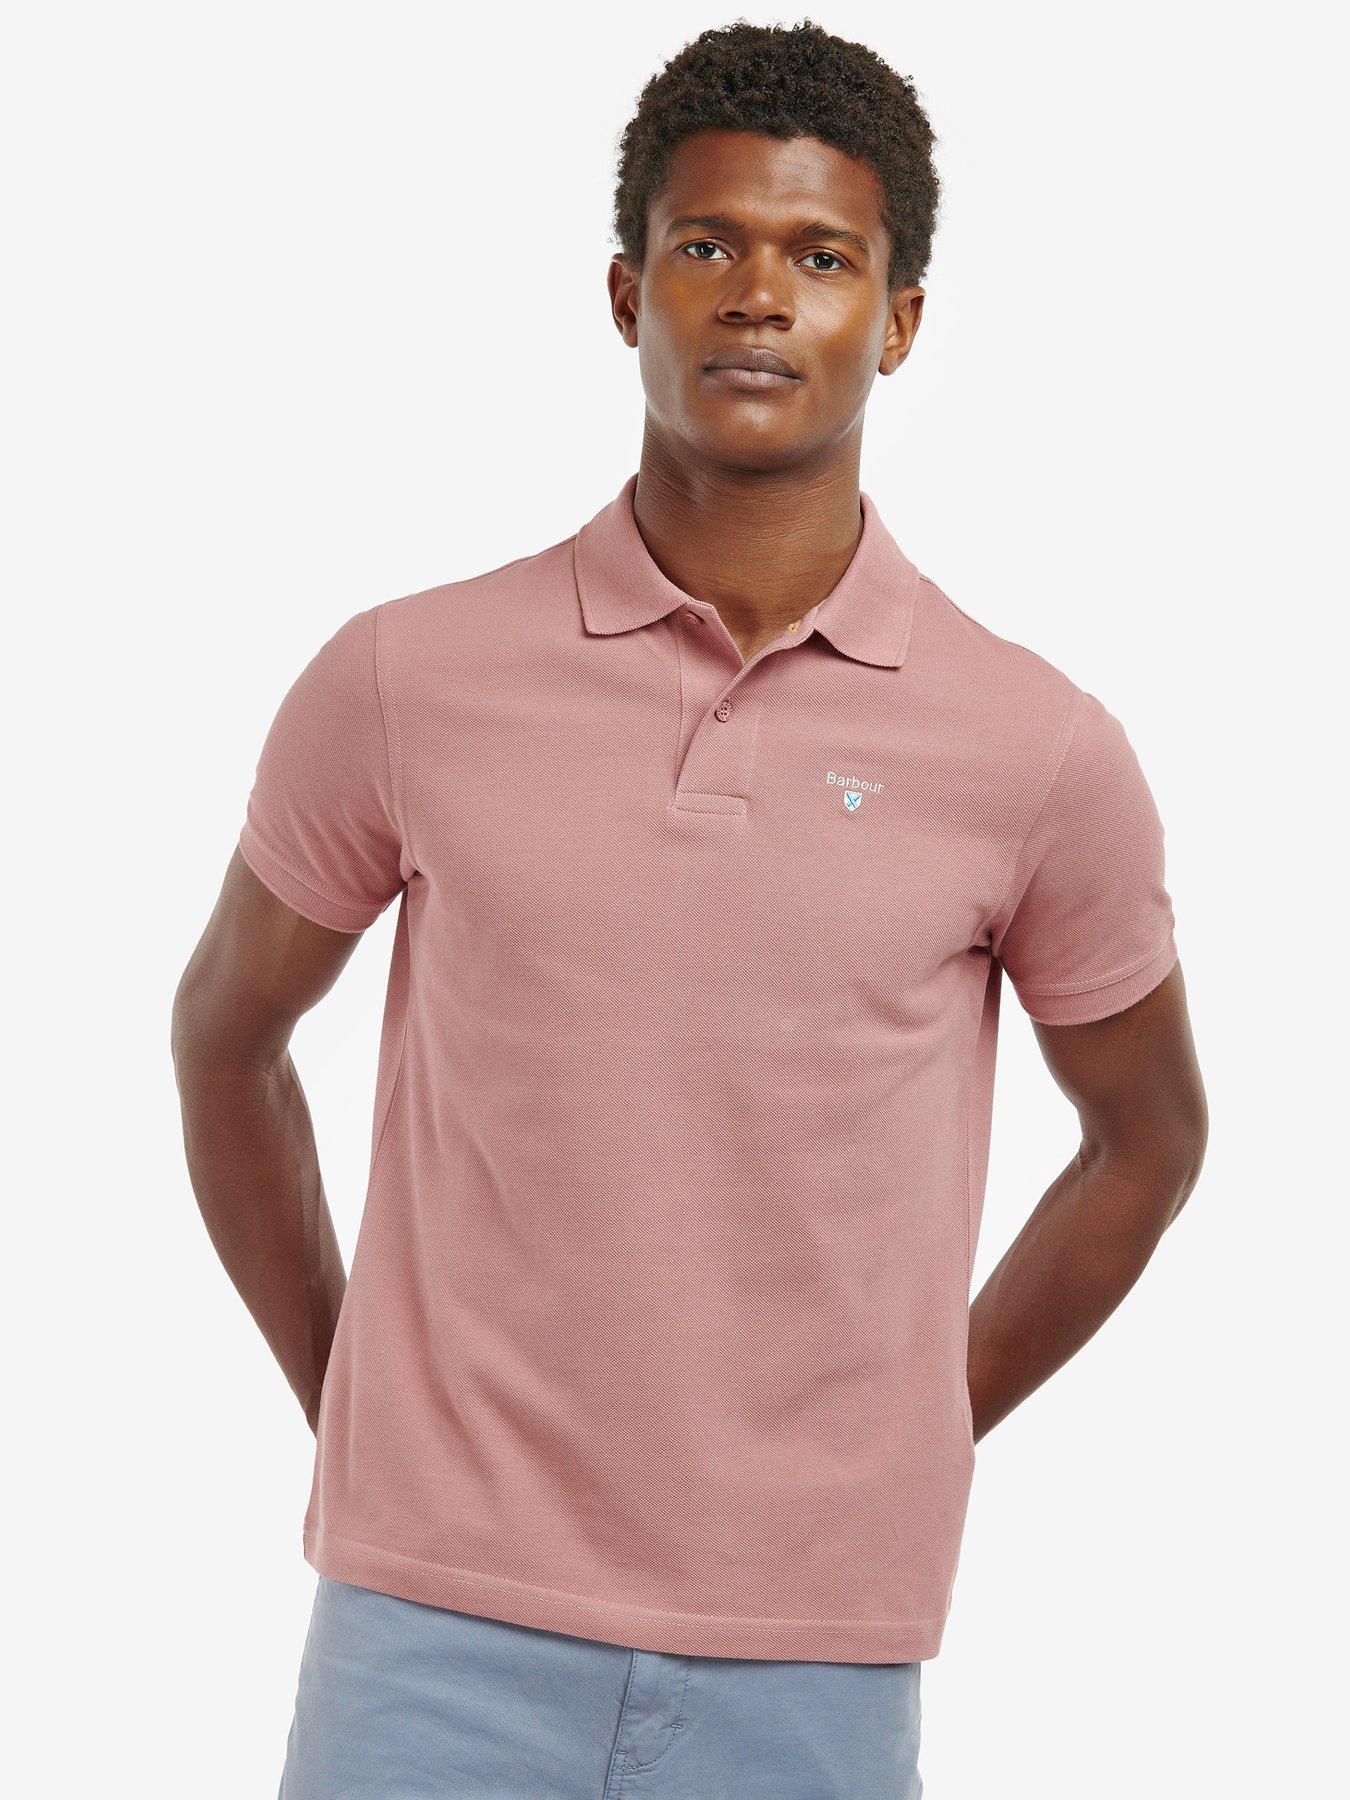 Sports - Shirt Polo Pink Barbour